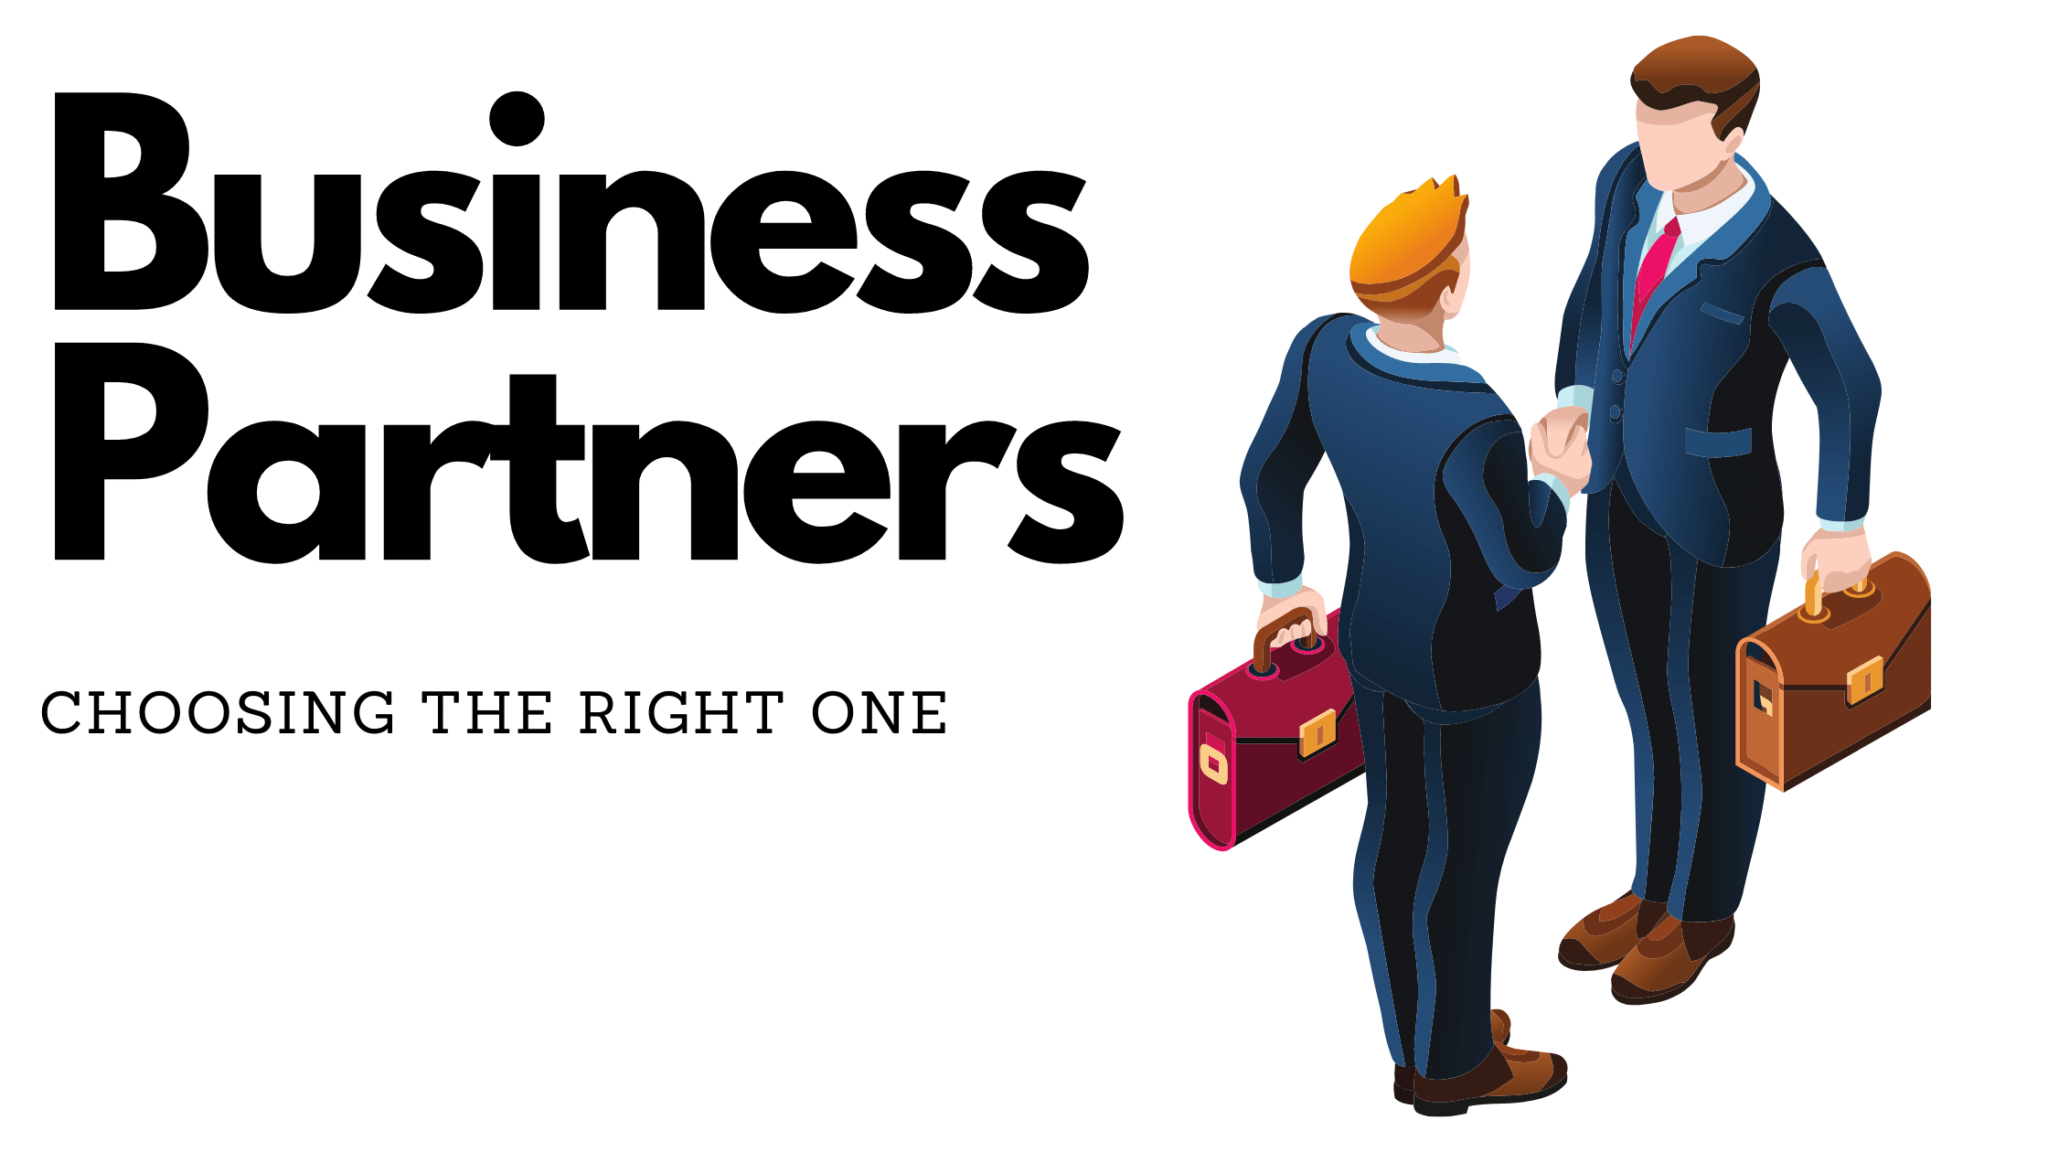 How to choose the right business partner